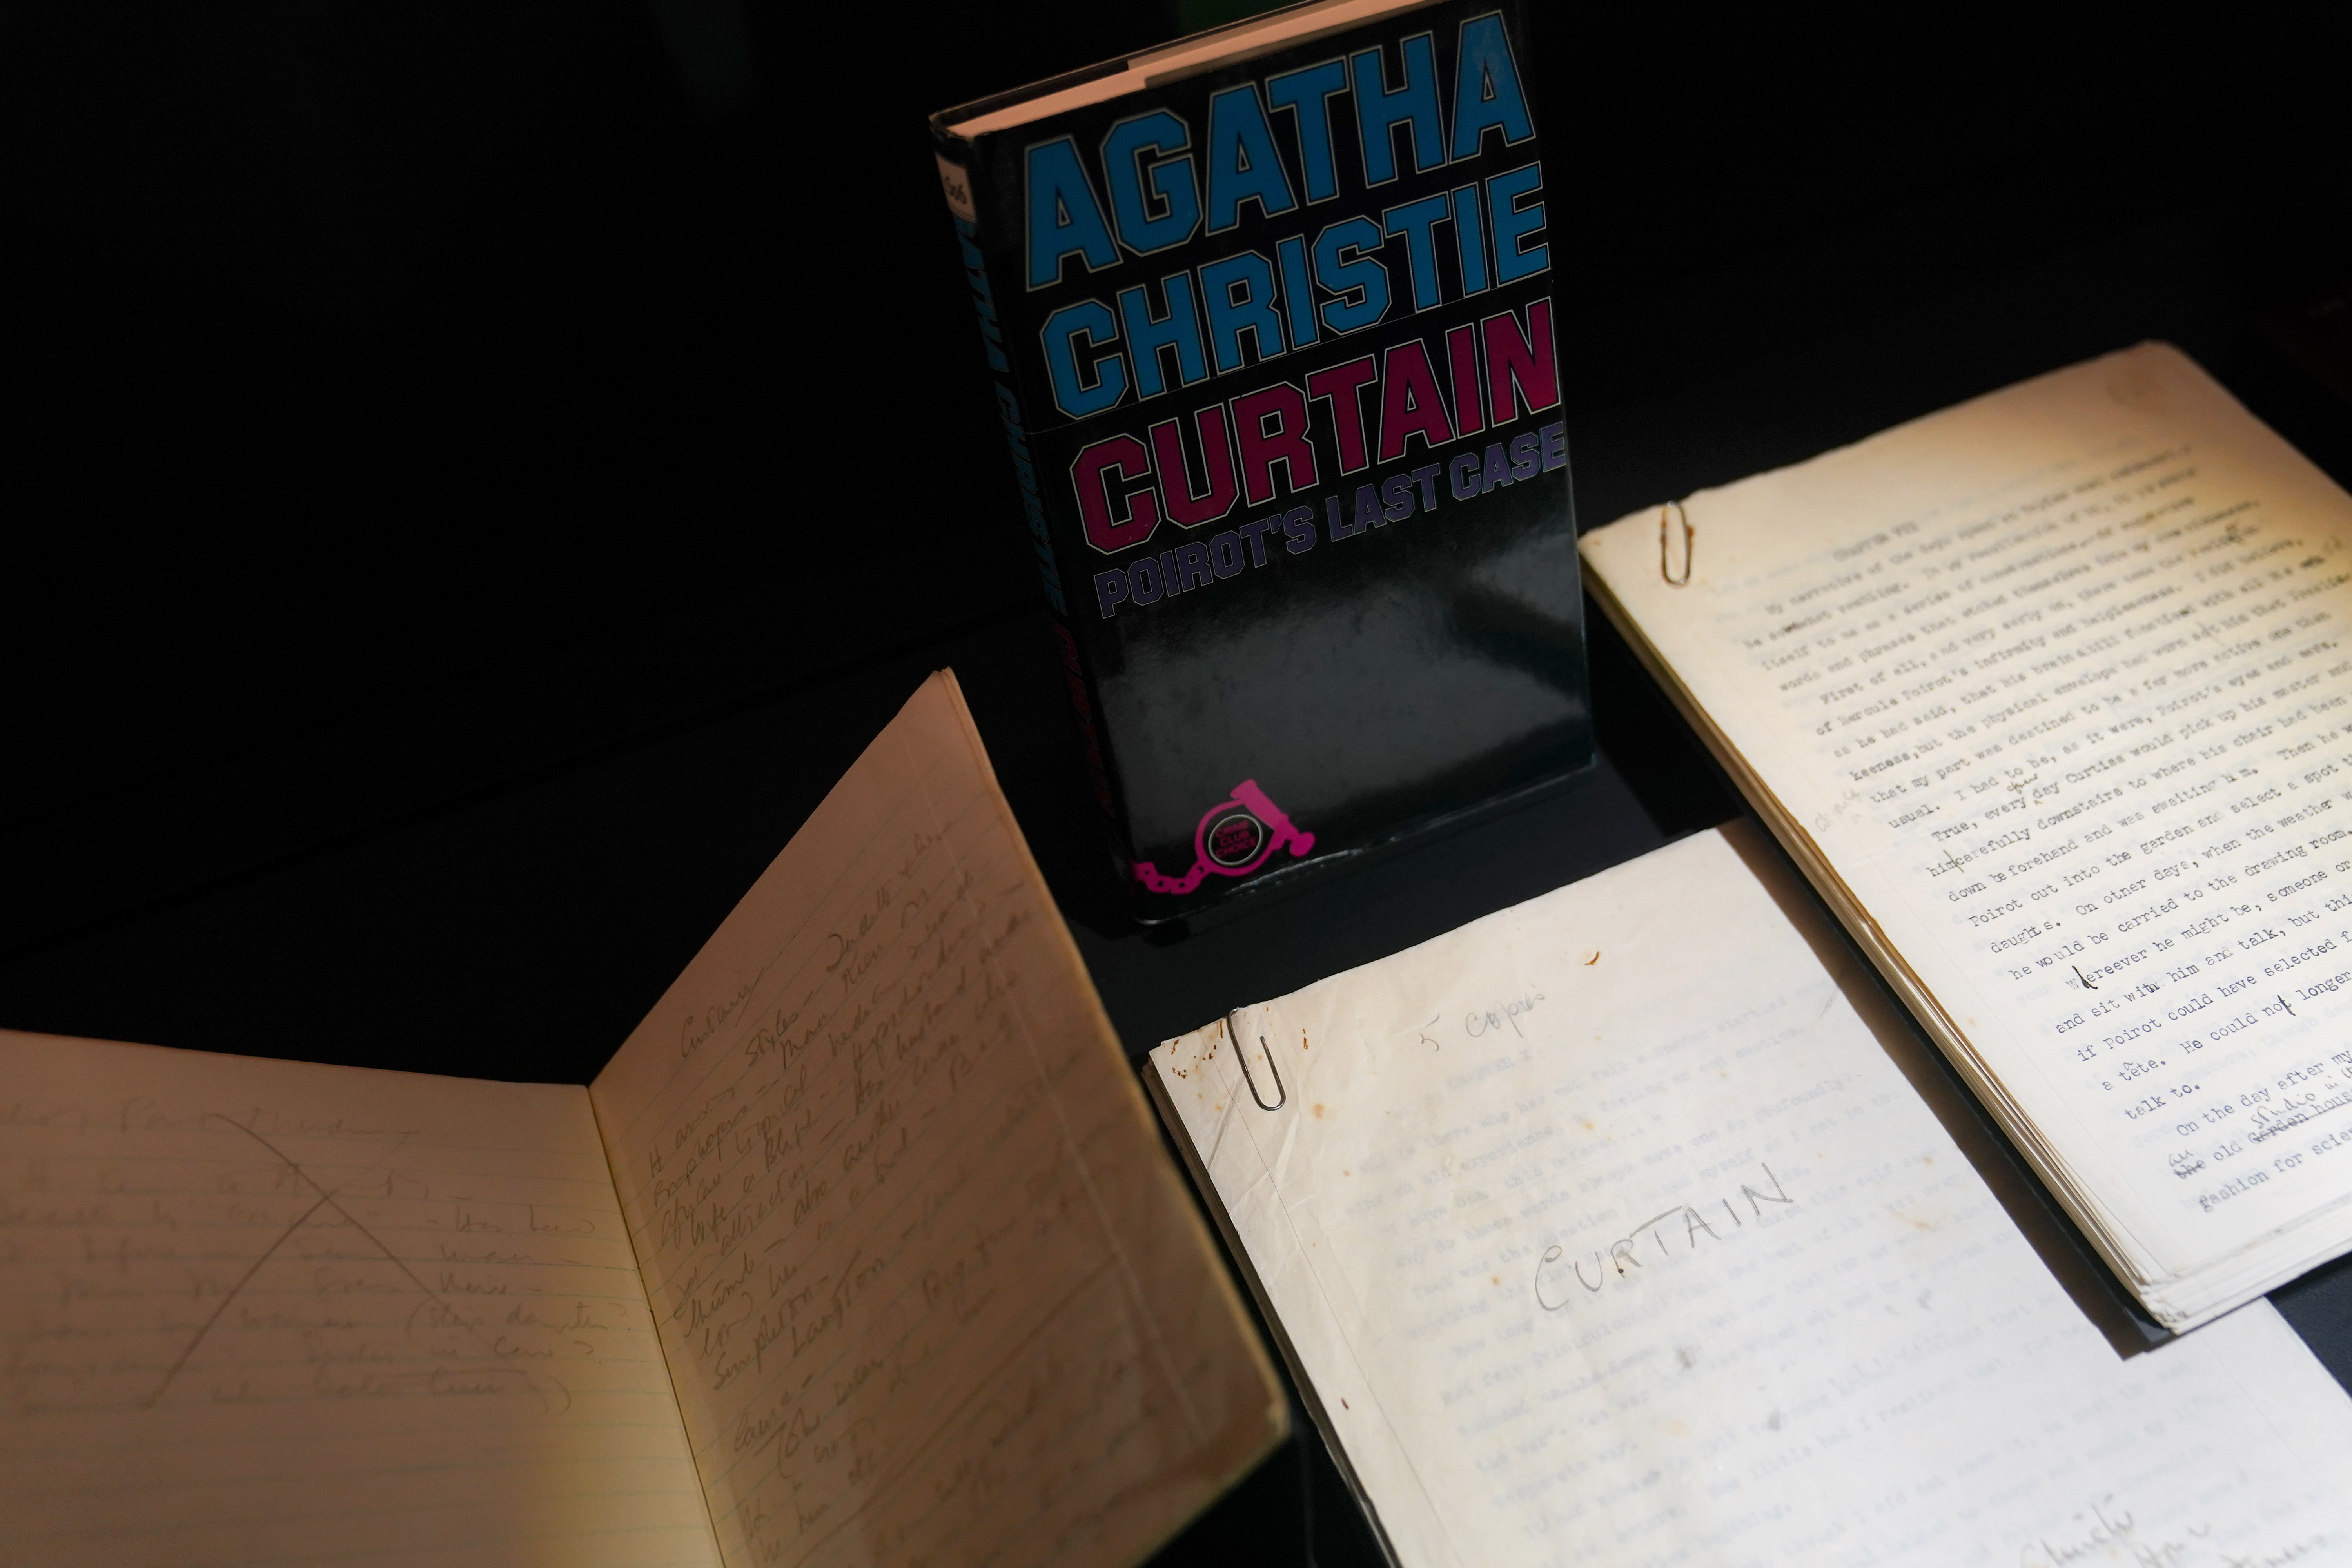 Agatha Christie's notebook and typescript for Curtain: Poirot's Last Case, which was kept in a bank vault for decades to avoid news of the detective's death from leaking, on display during a preview of Murder by the Book: A Celebration of 20th Century Crime Fiction. (Joe Giddens/ PA)